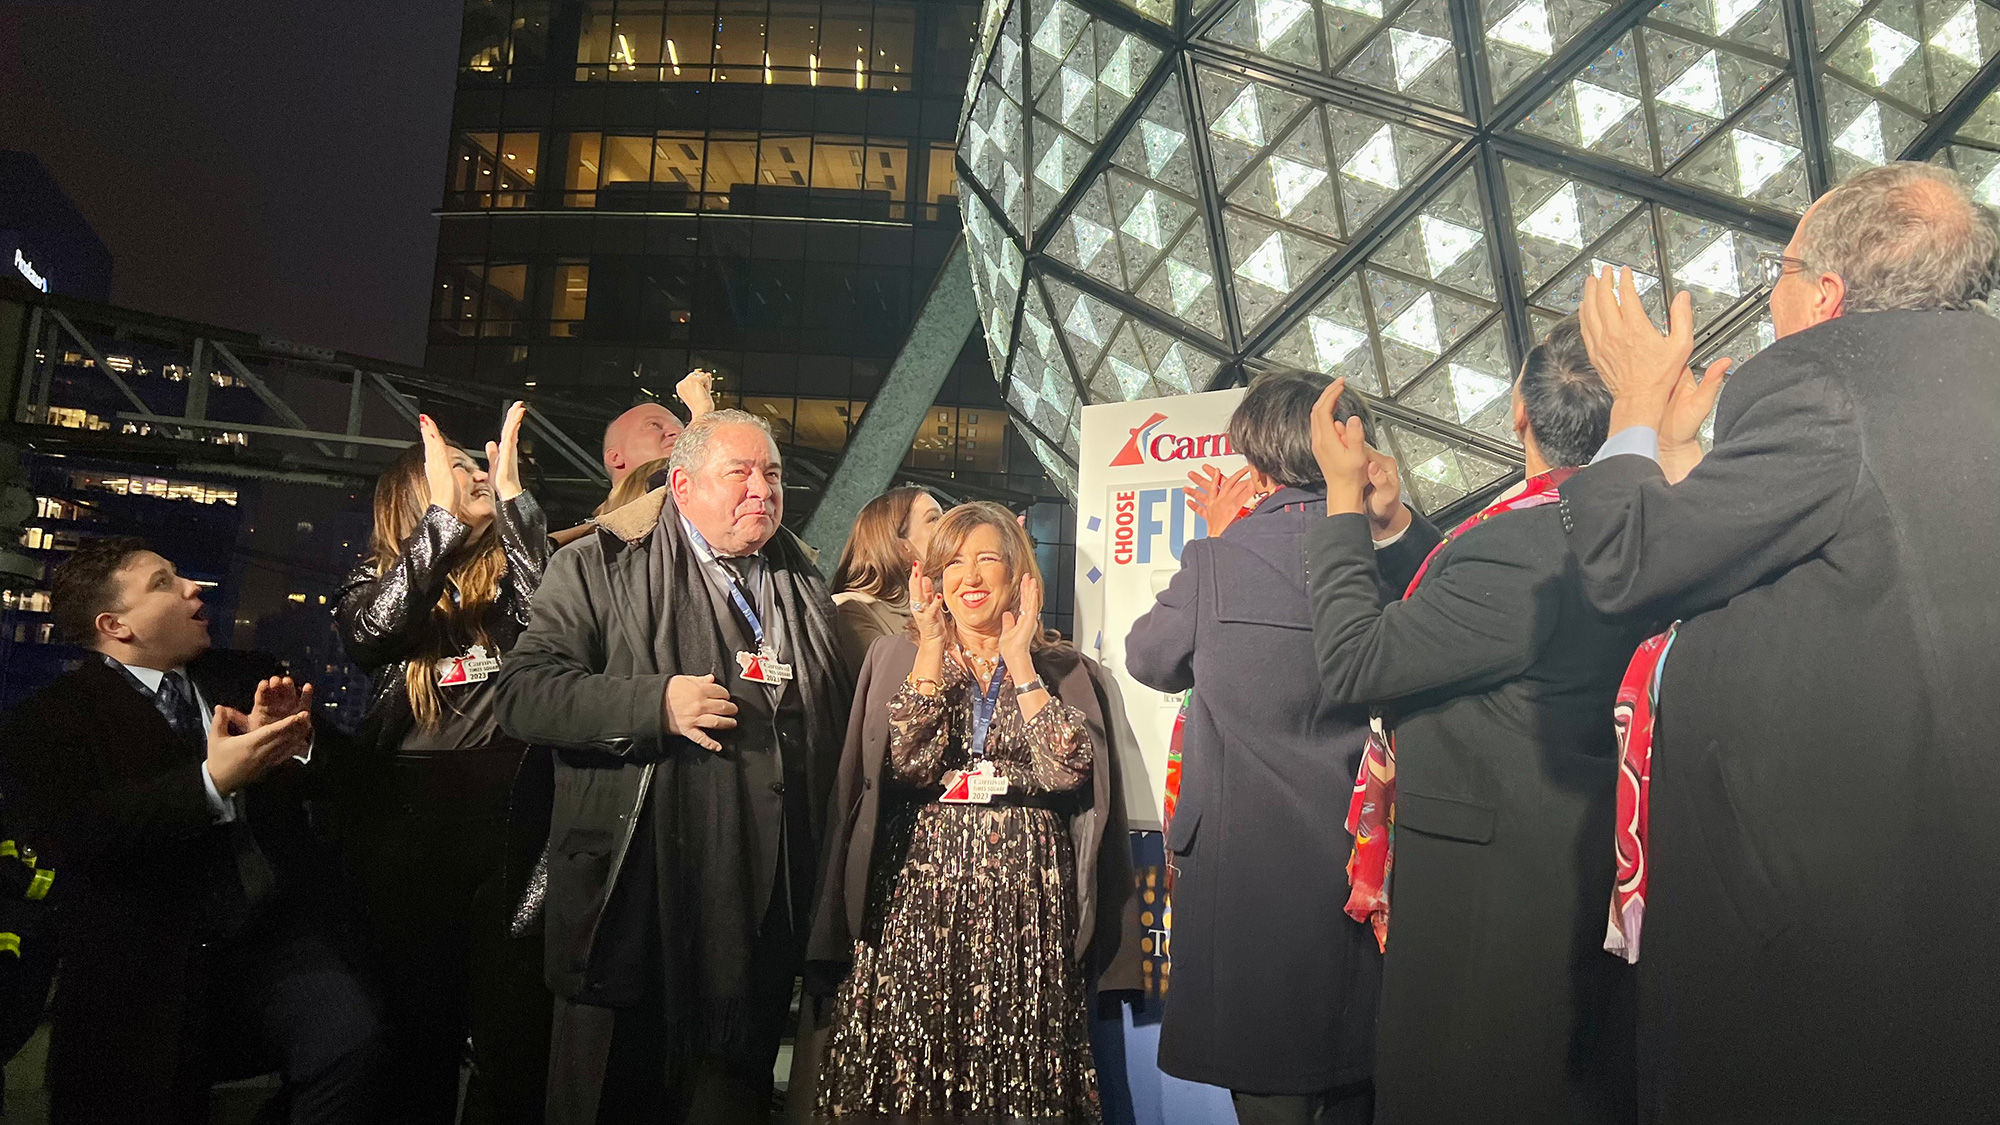 Carnival president Christine Duffy and the line’s chief culinary officer, Emeril Lagasse, flipped the switch to light up the Times Square Ball.